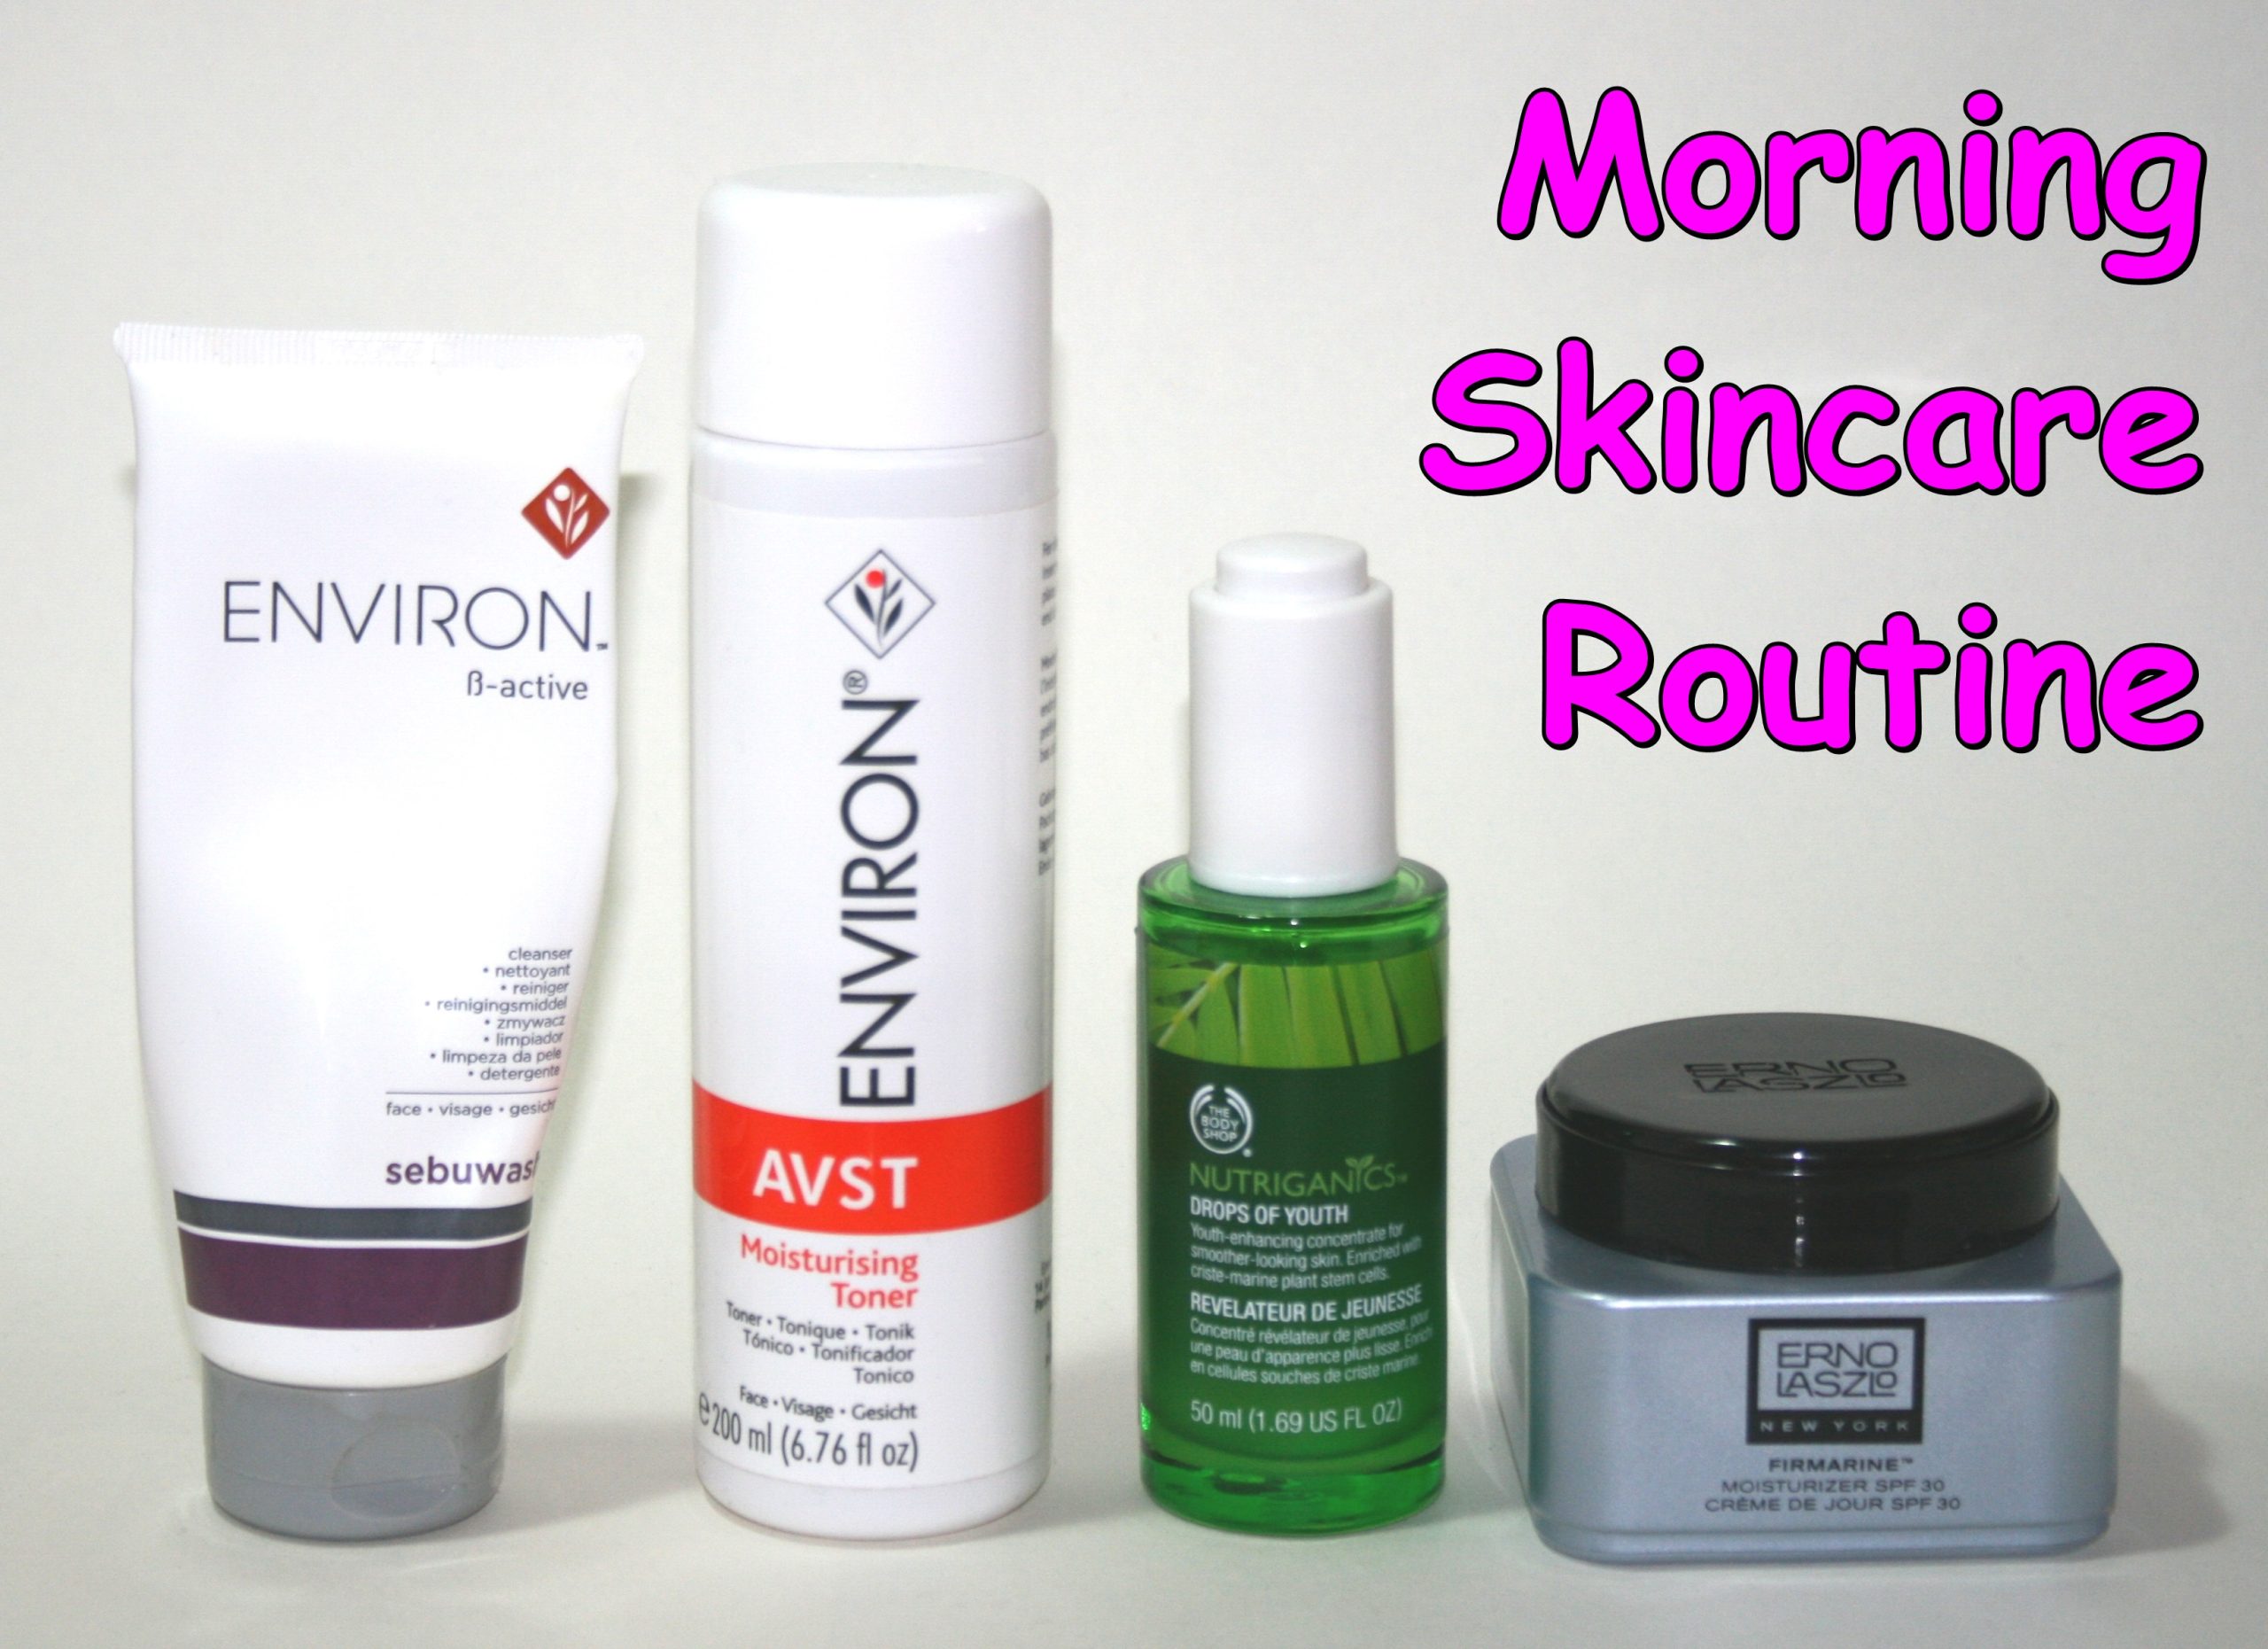 Morning Skincare Routine (July 2014)